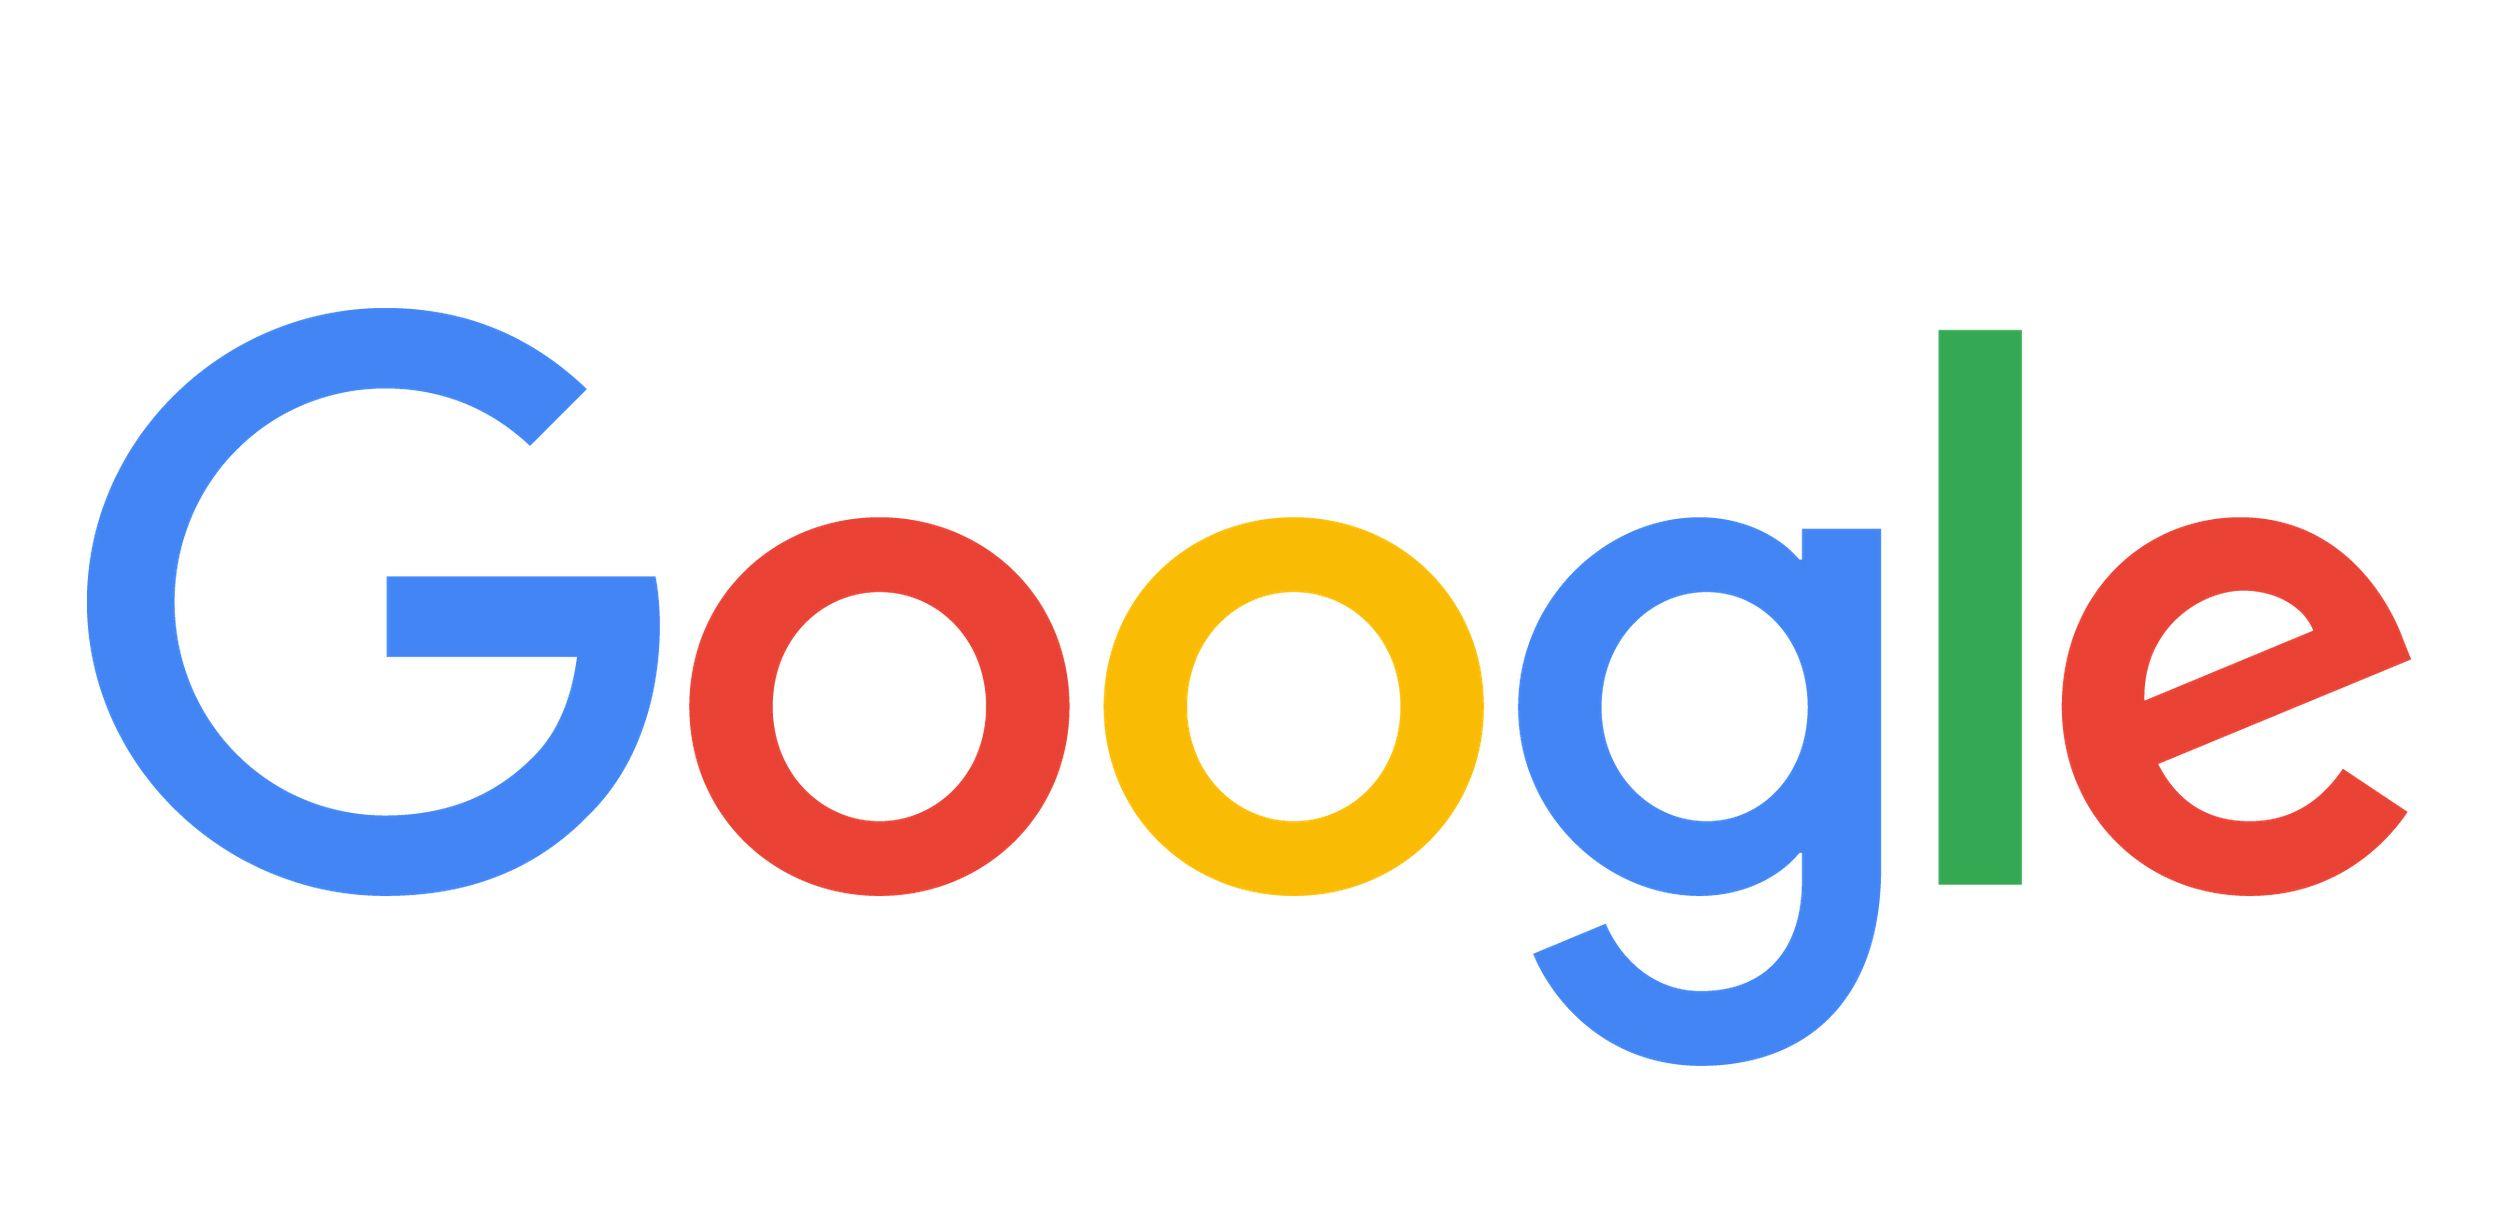 Best Google Logo - Google Doodles at 20: the changing faces of the Google logo